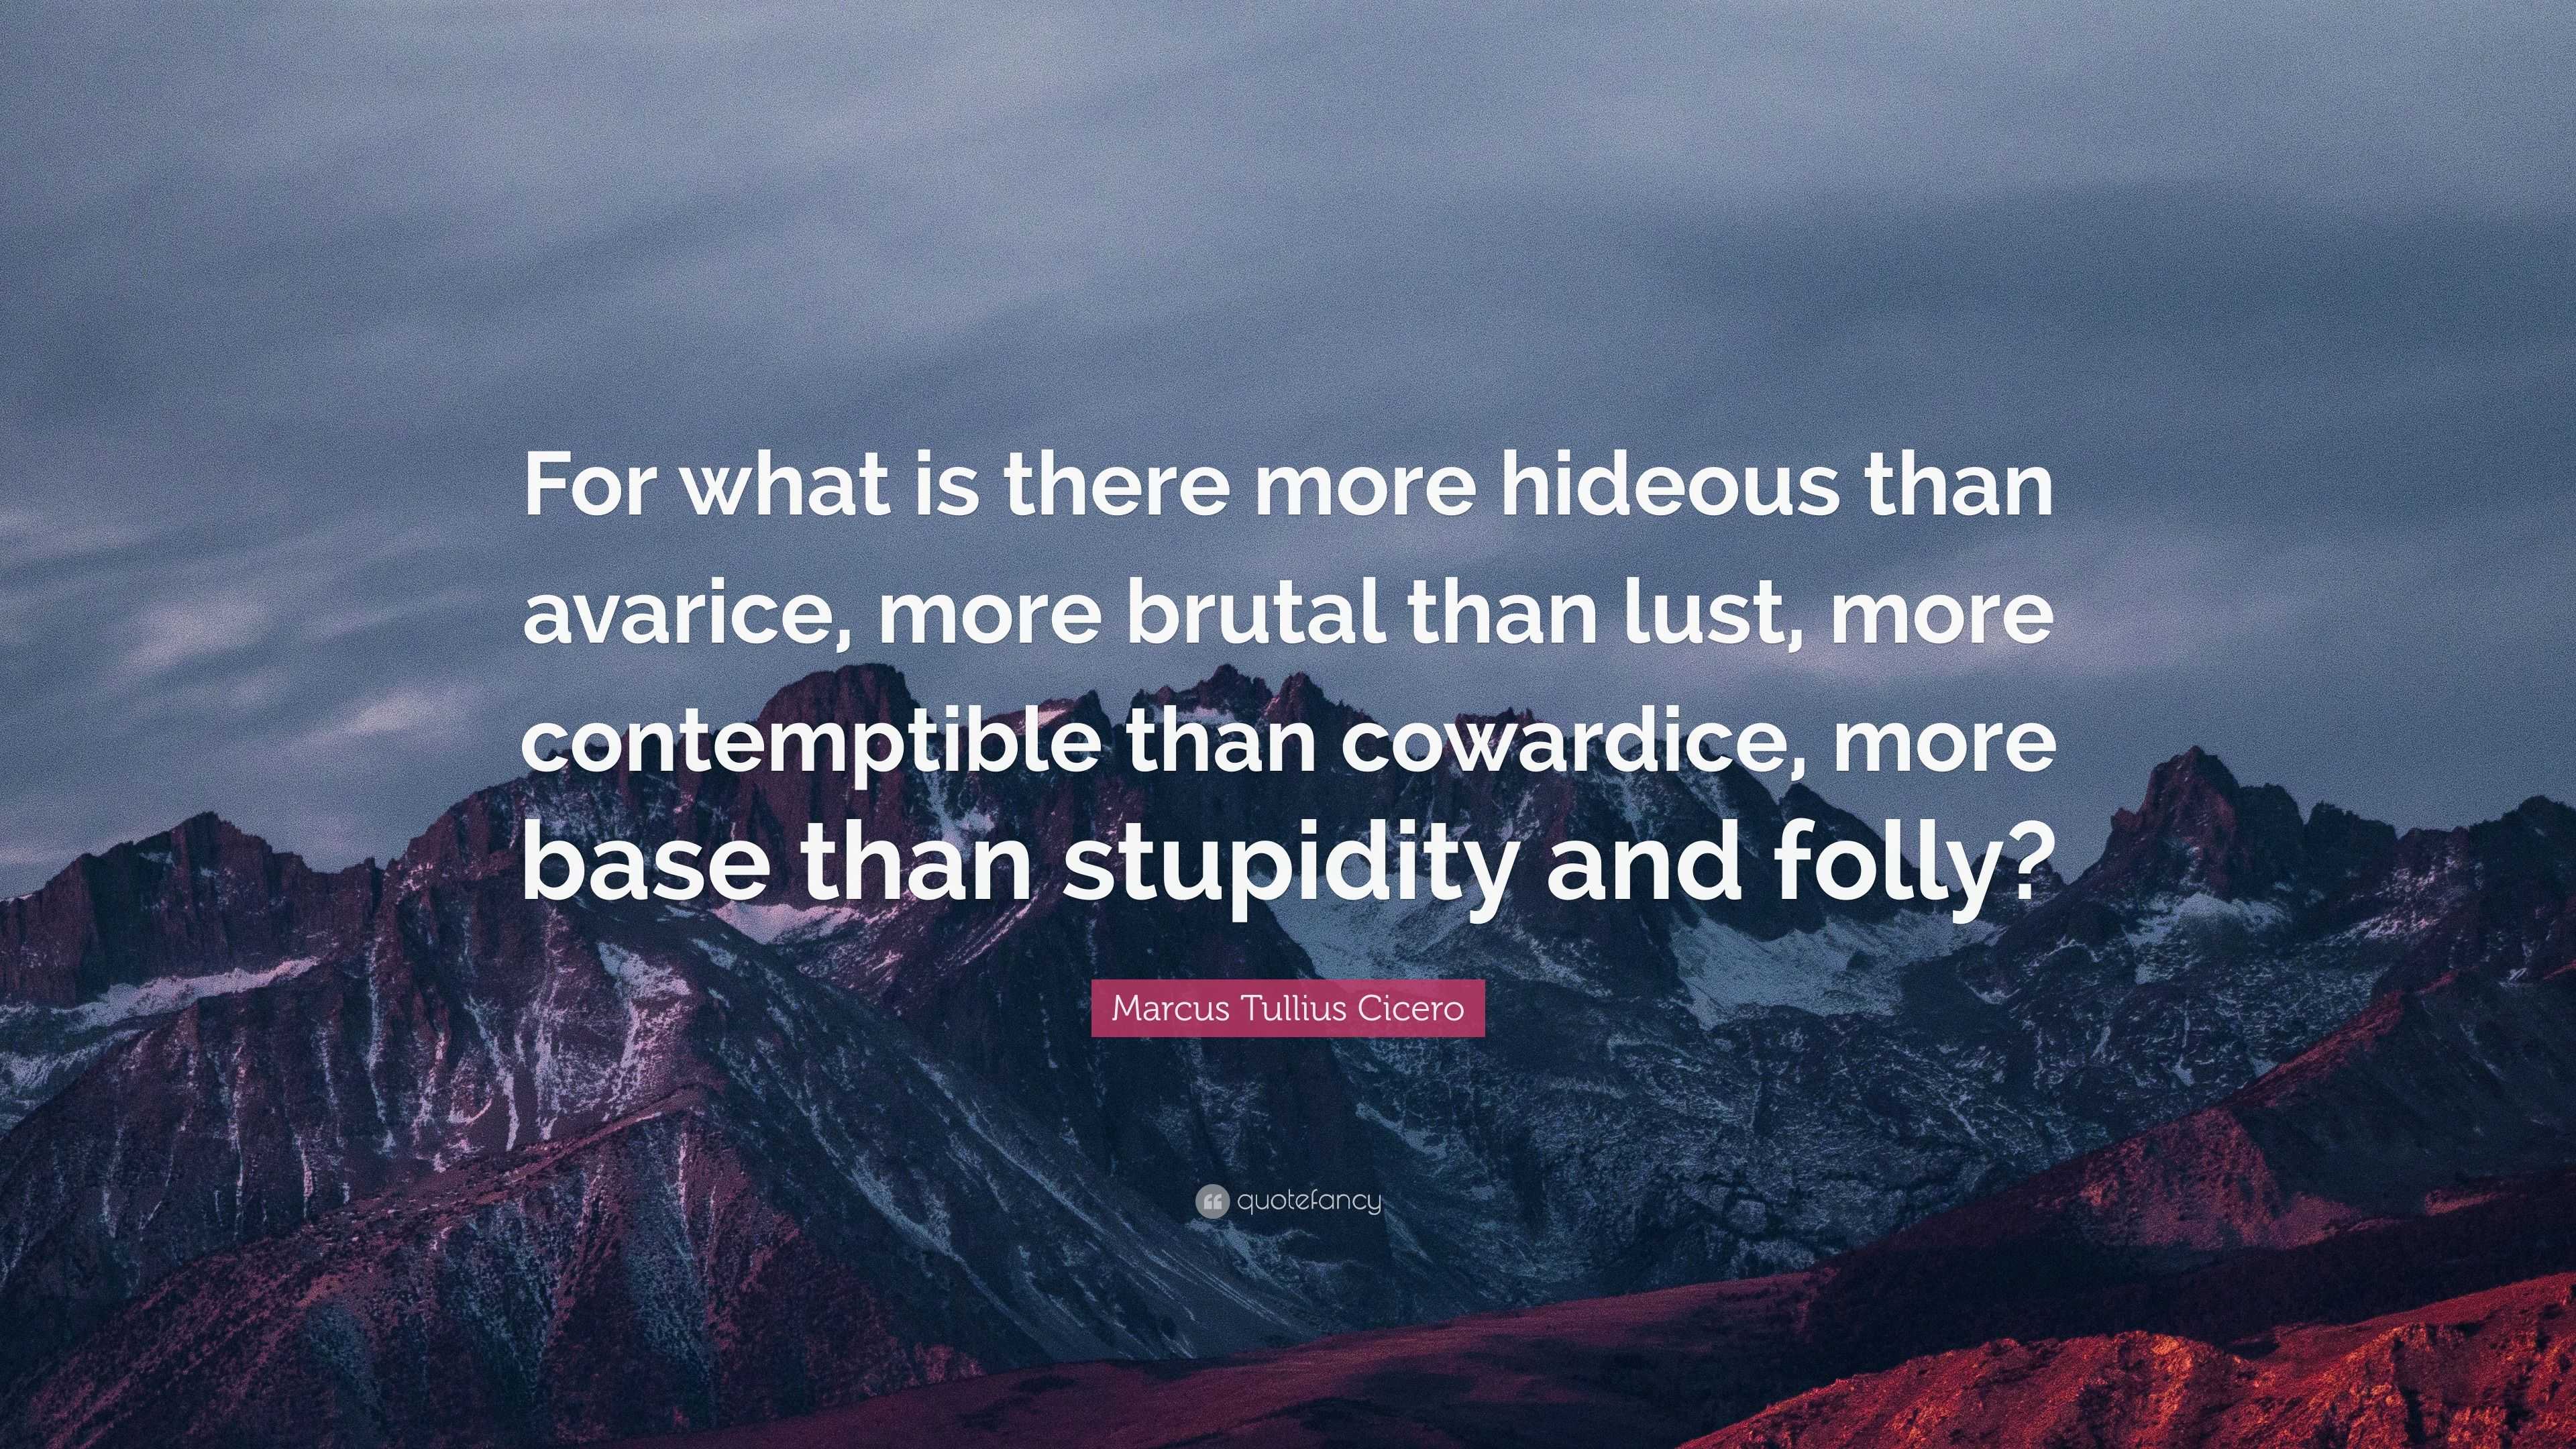 Marcus Tullius Cicero Quote: “For what is there more hideous than ...